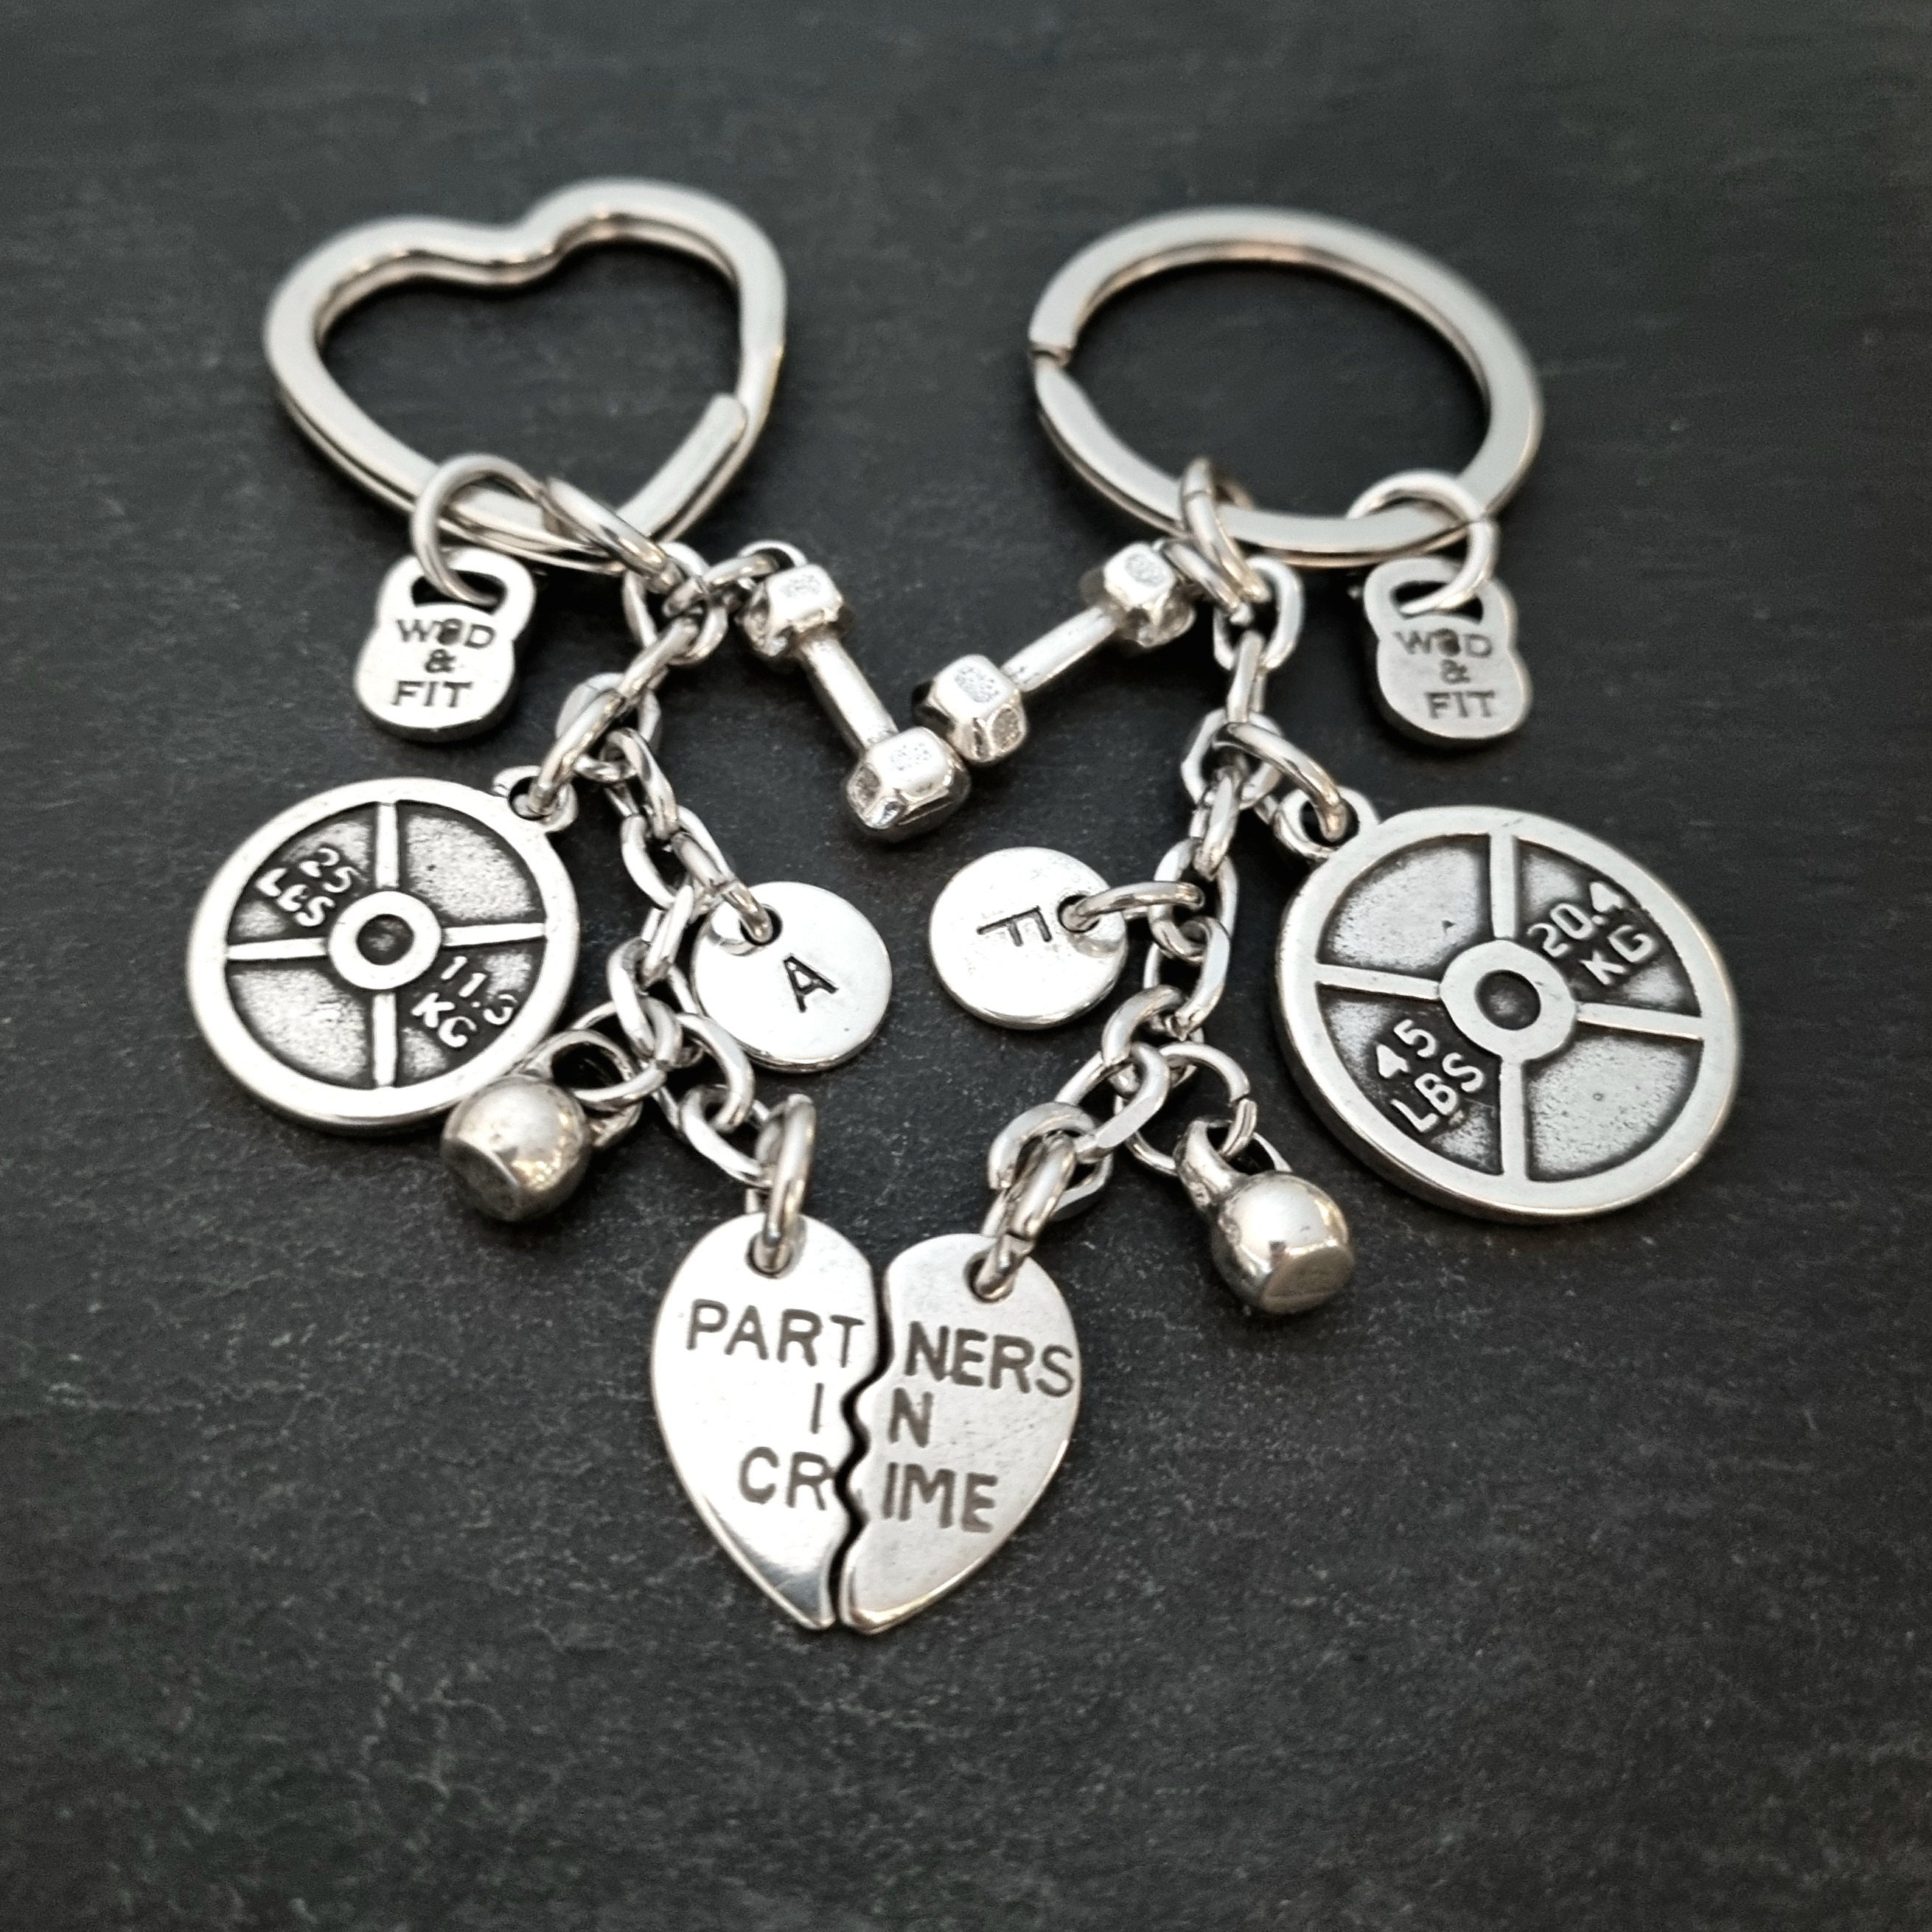 Thelma and Louise Keychain Best Friend Gift Soul Sisters Keychain Pistol  Keychain Friendship Jewelry Moving Away Gift 2pcs/set